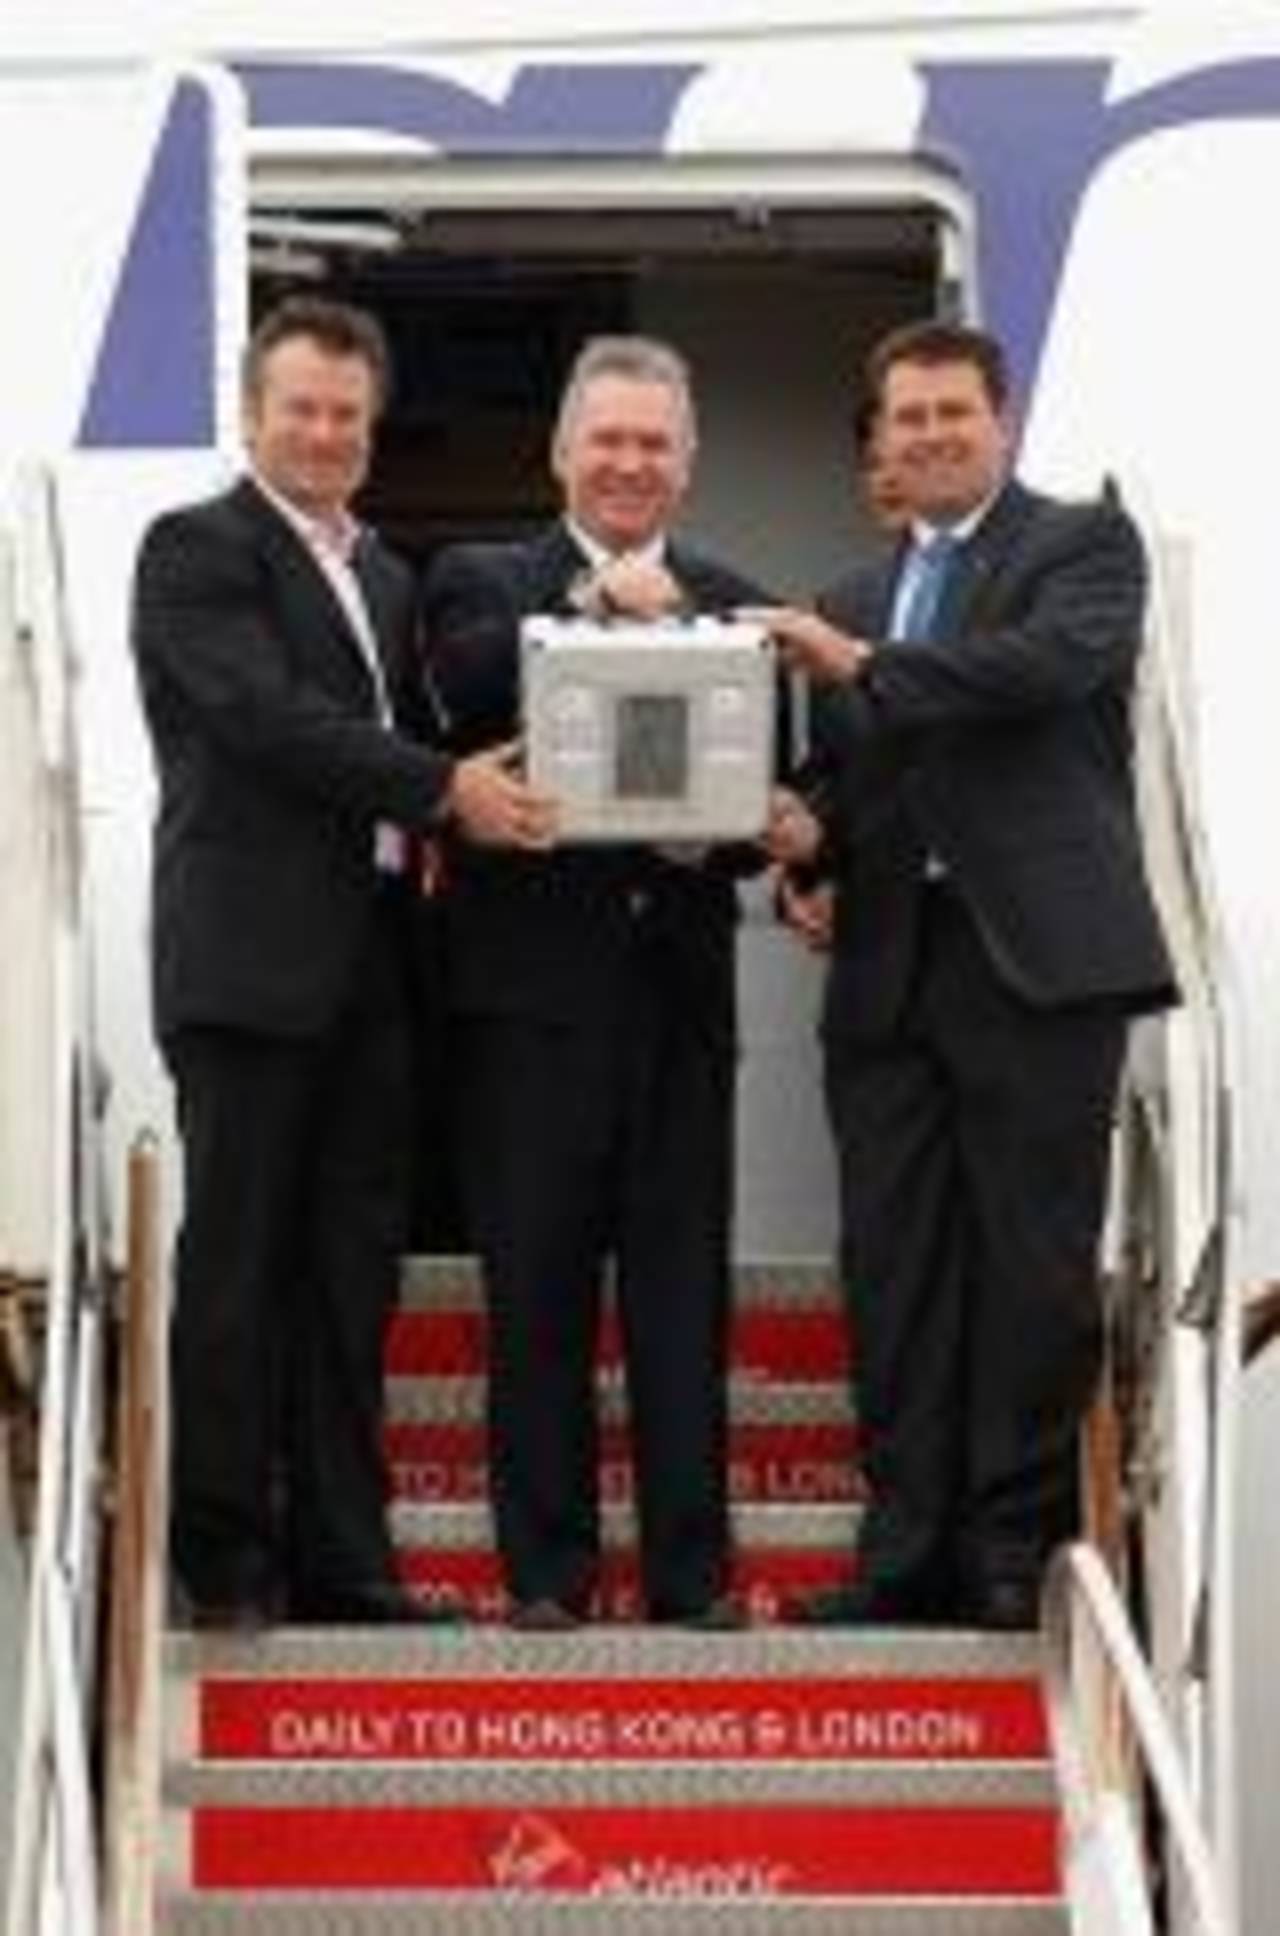 Steve Waugh, Allan Border and Mark Taylor, former Australian captains, pose with the Ashes urn after it arrived in Sydney from England. October 17, 2006